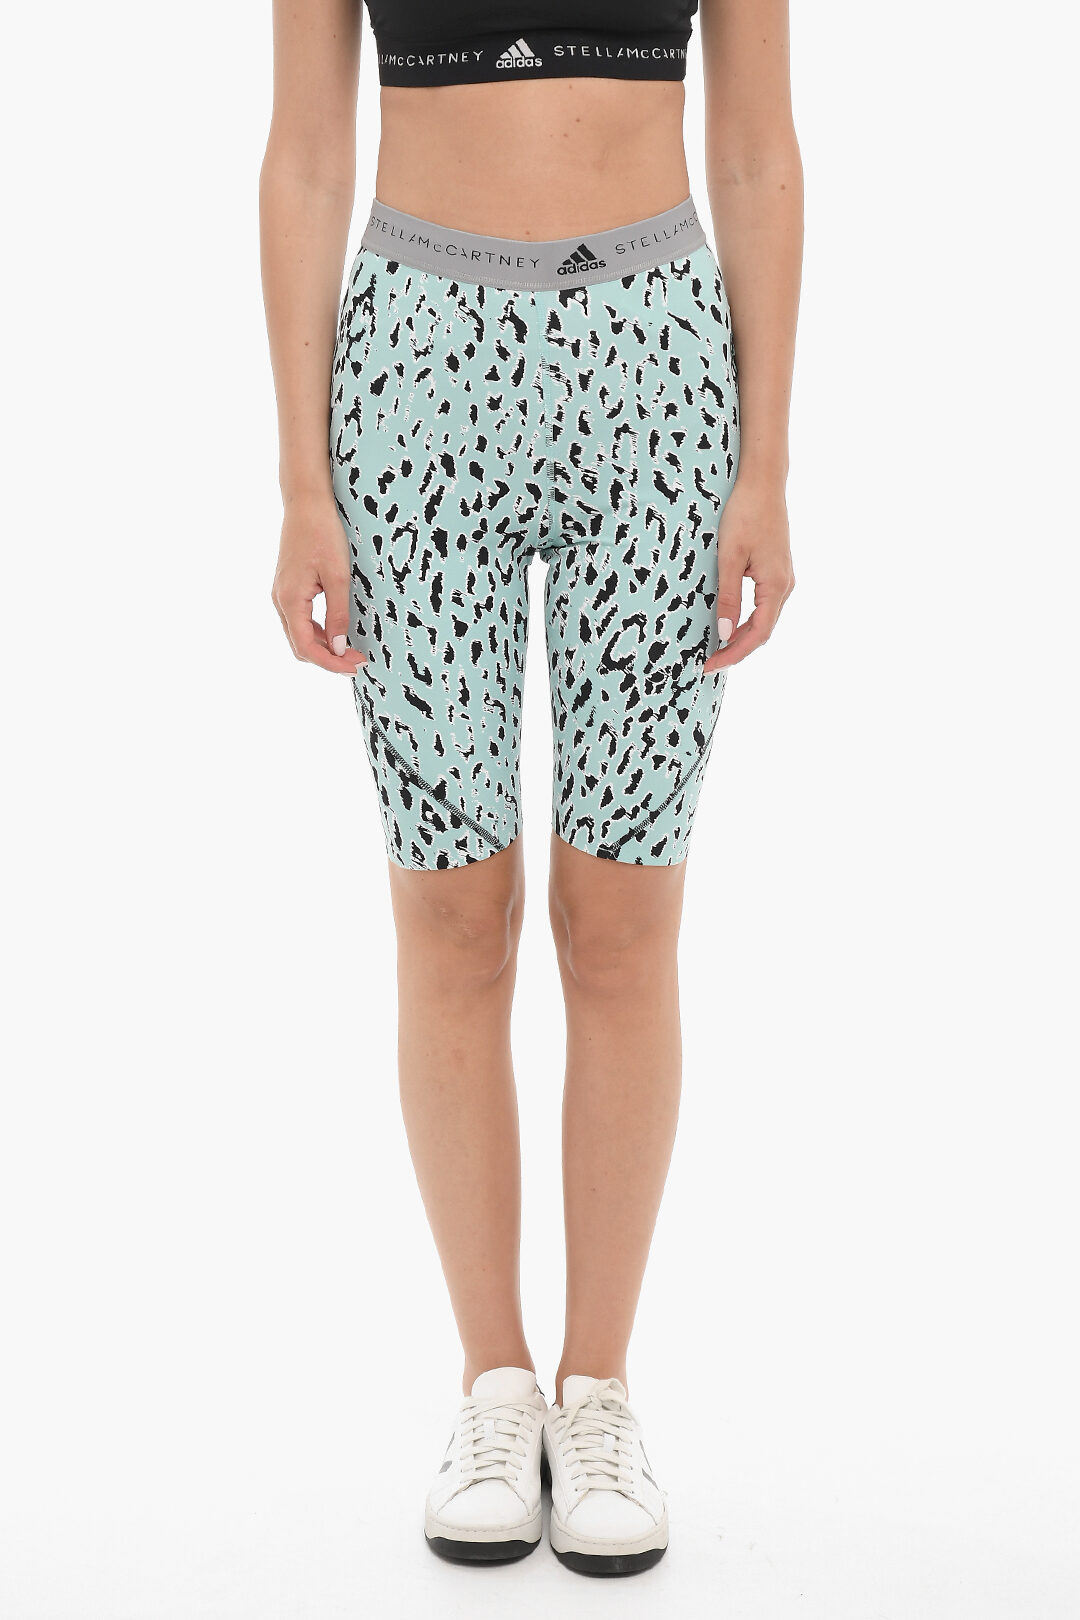 STELLA Animal Patterned High-Waisted Active Shorts women - Glamood Outlet